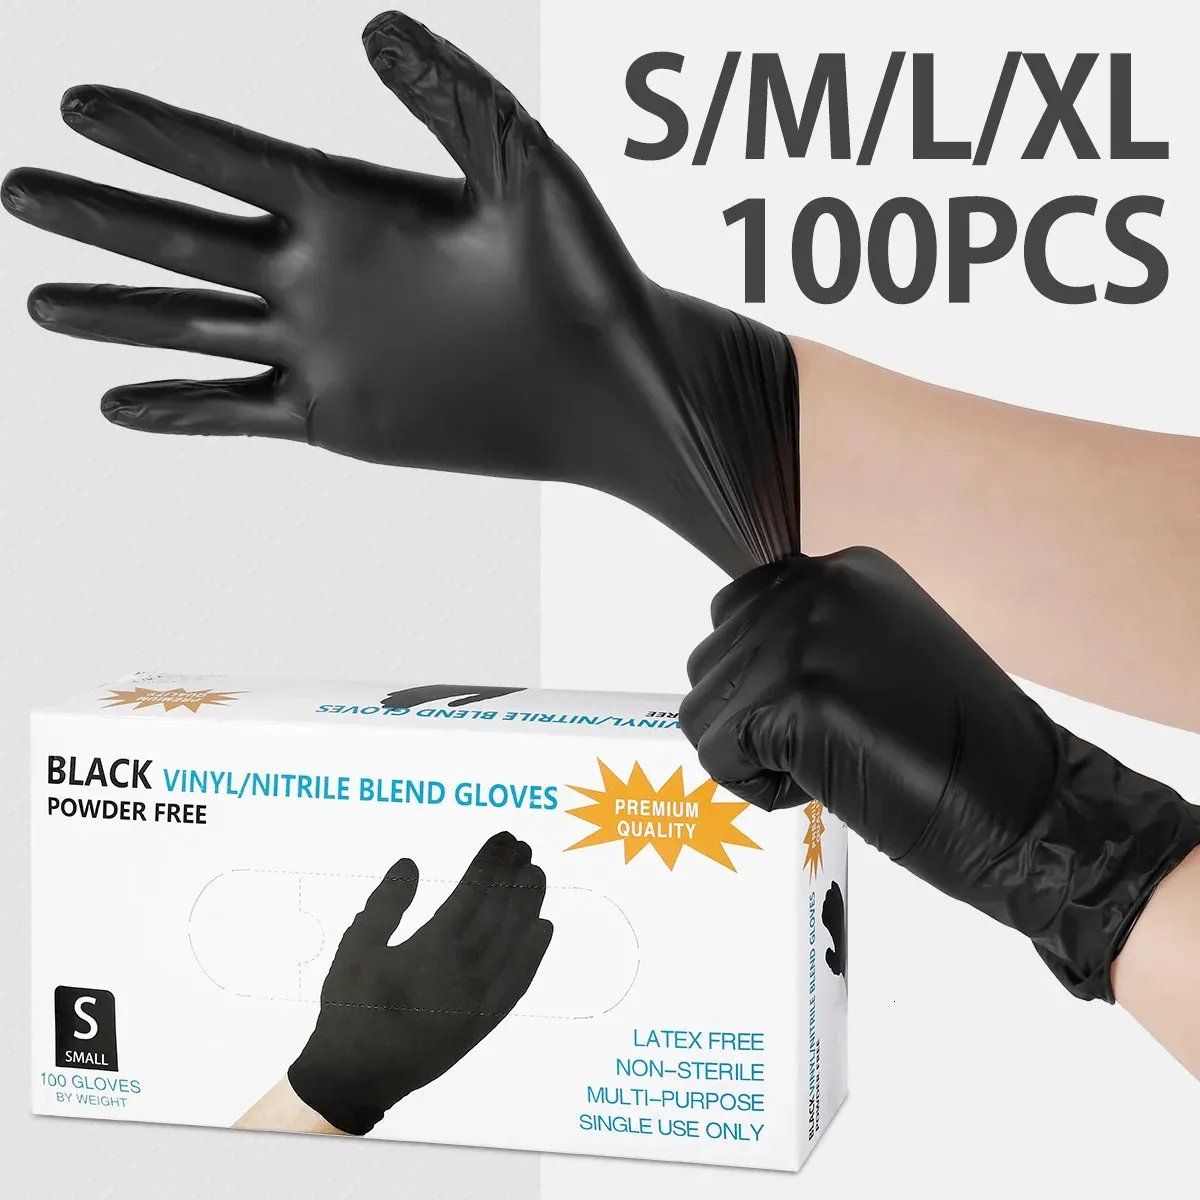 Other Housekeeping Organization 100pcs Black Disposable Rubber Nitrile Gloves for Cooking Work Housework Kitchen Home Cleaning Car Repair Waterproof 231211